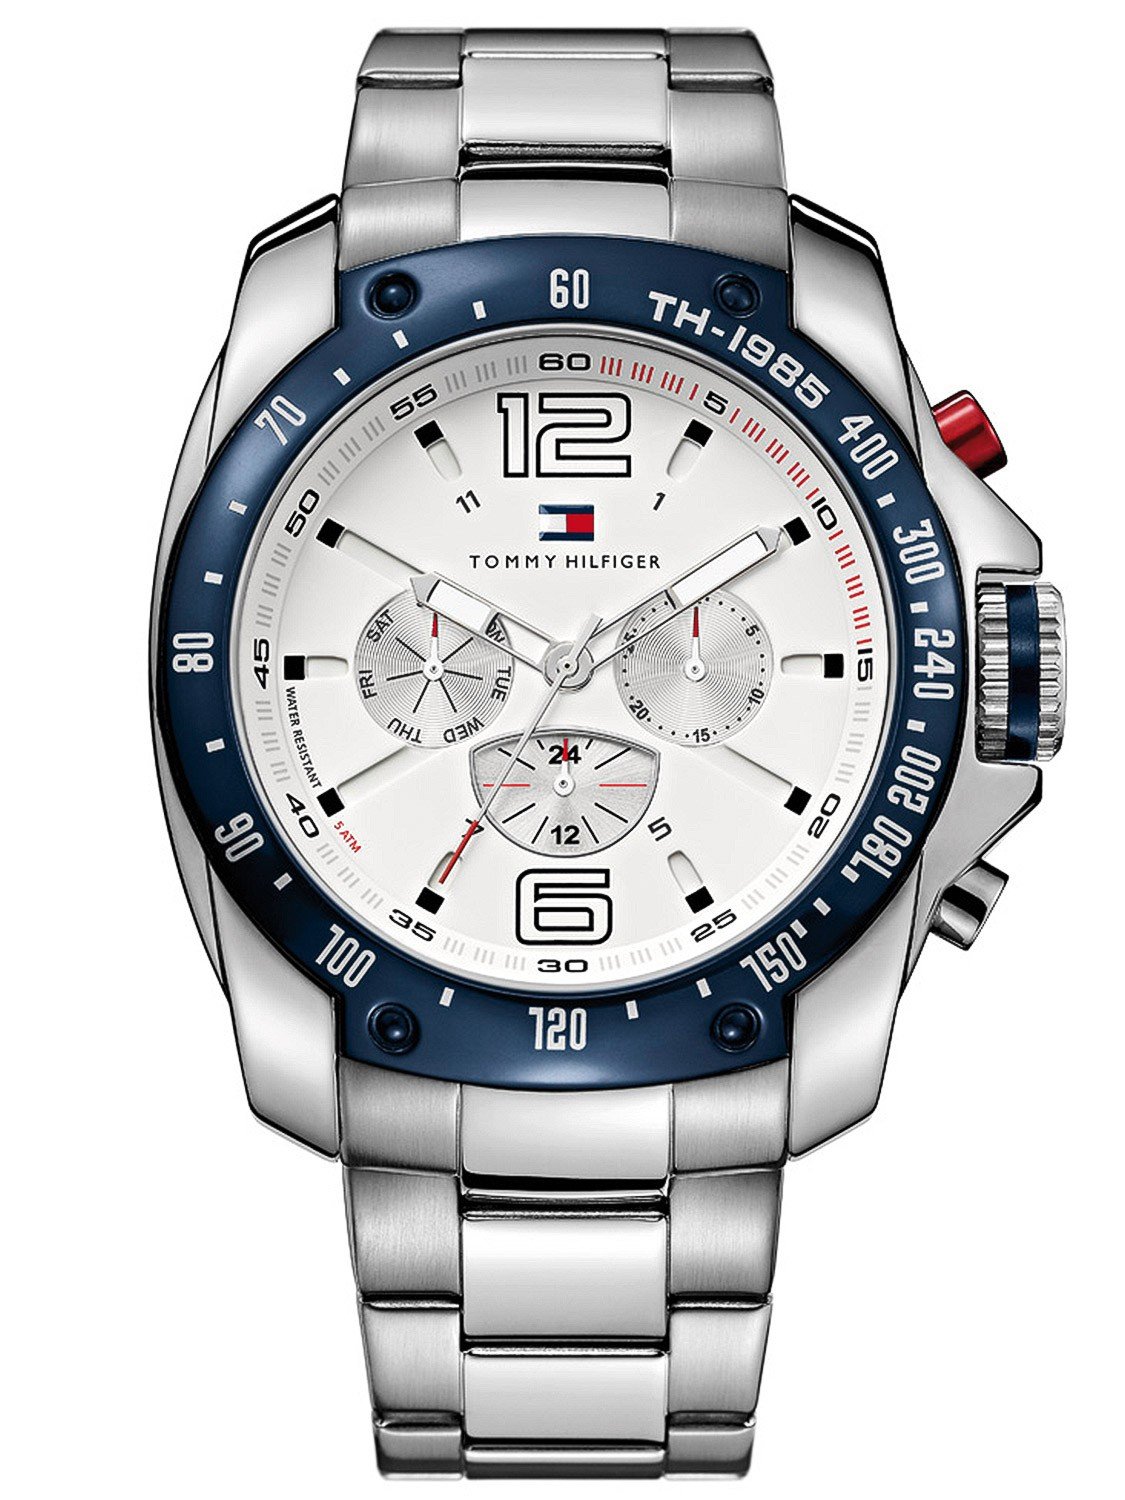 Tommy Hilfiger Men's Watches 1790871 Grand Prix Dual Time Mens Watch